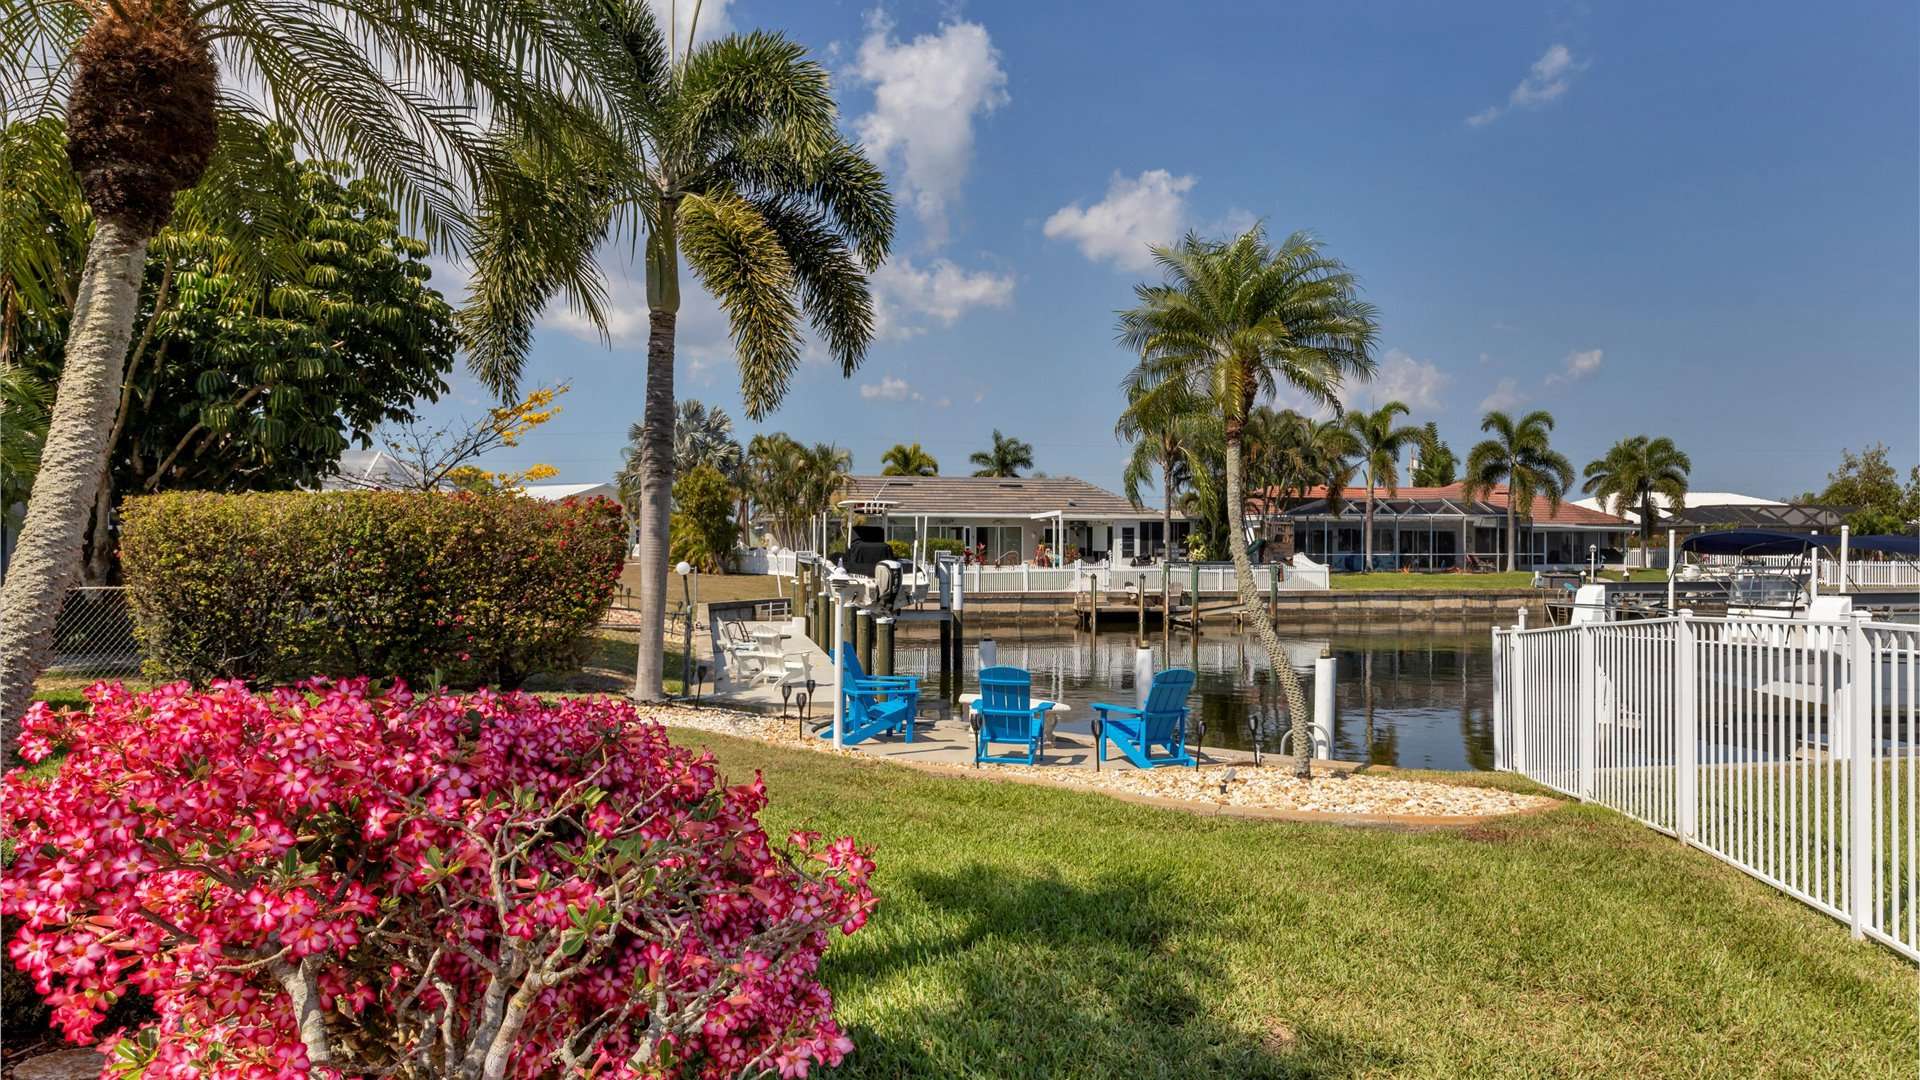 Gorgeous landscaping at this canalfront home in Punta Gorda Isles